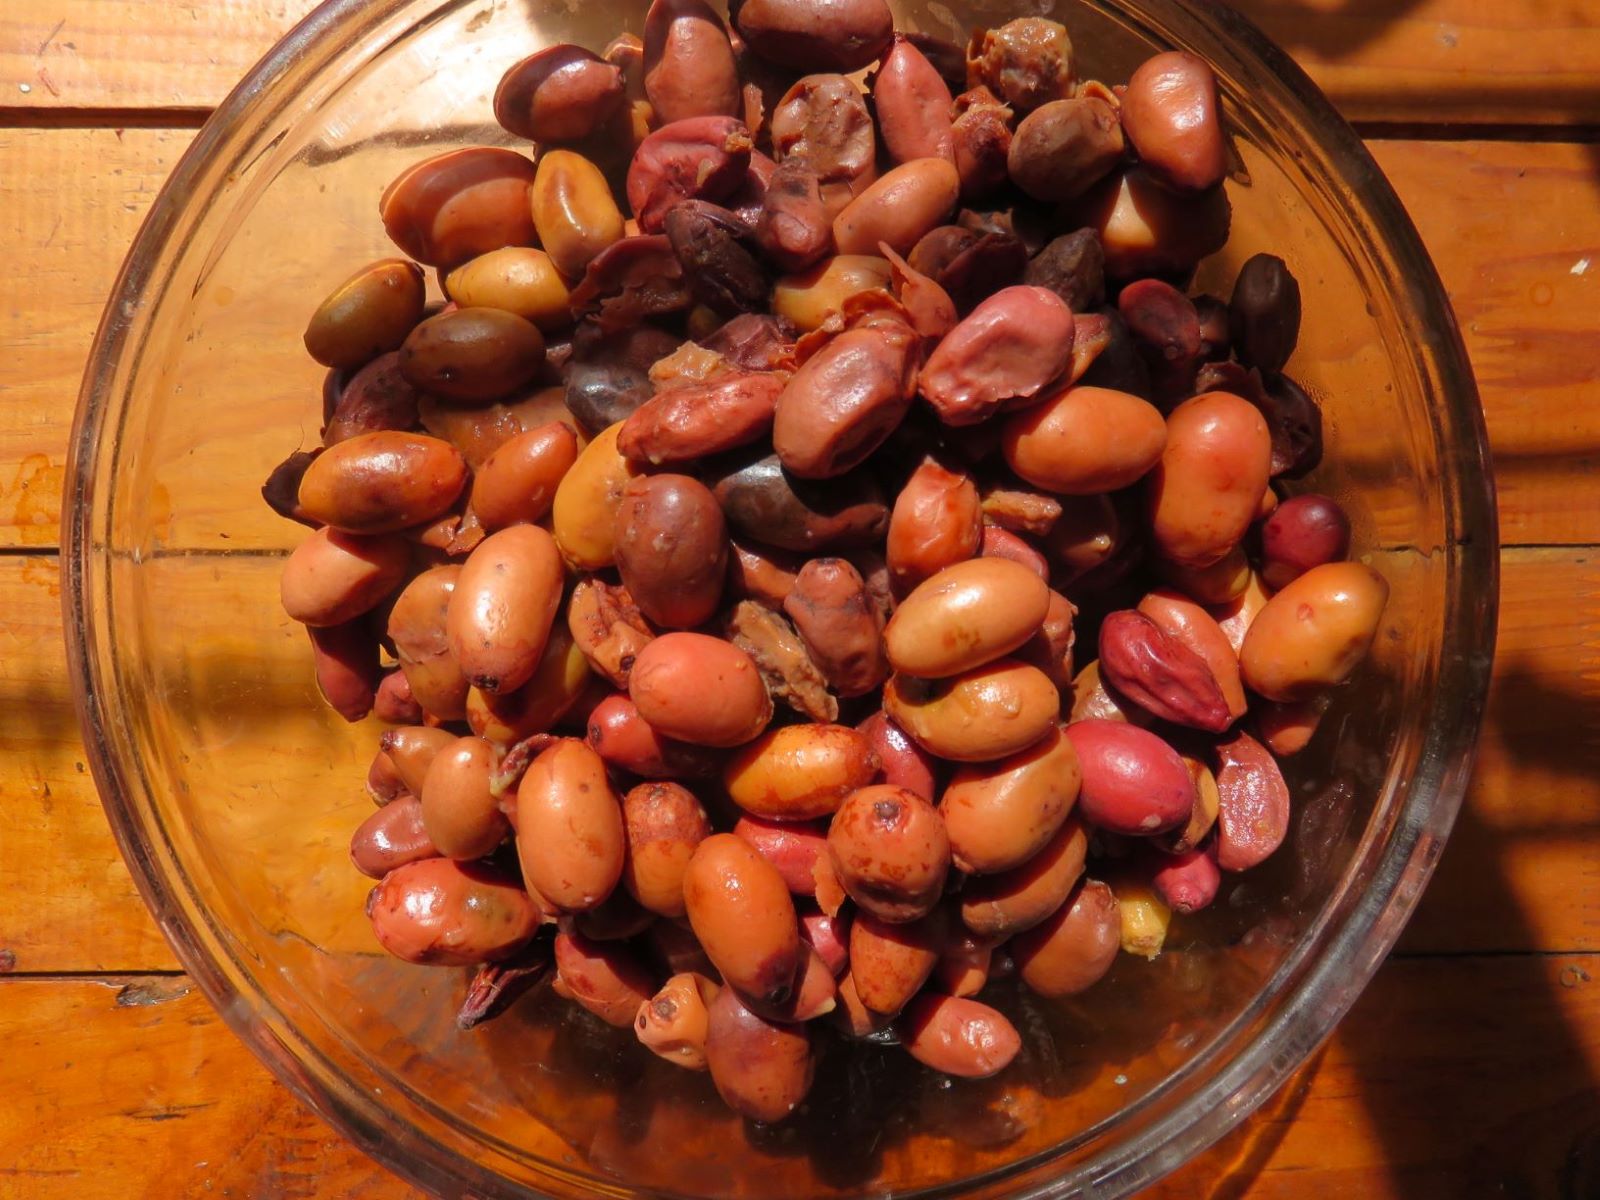 The fruit after fermentation and sorting.